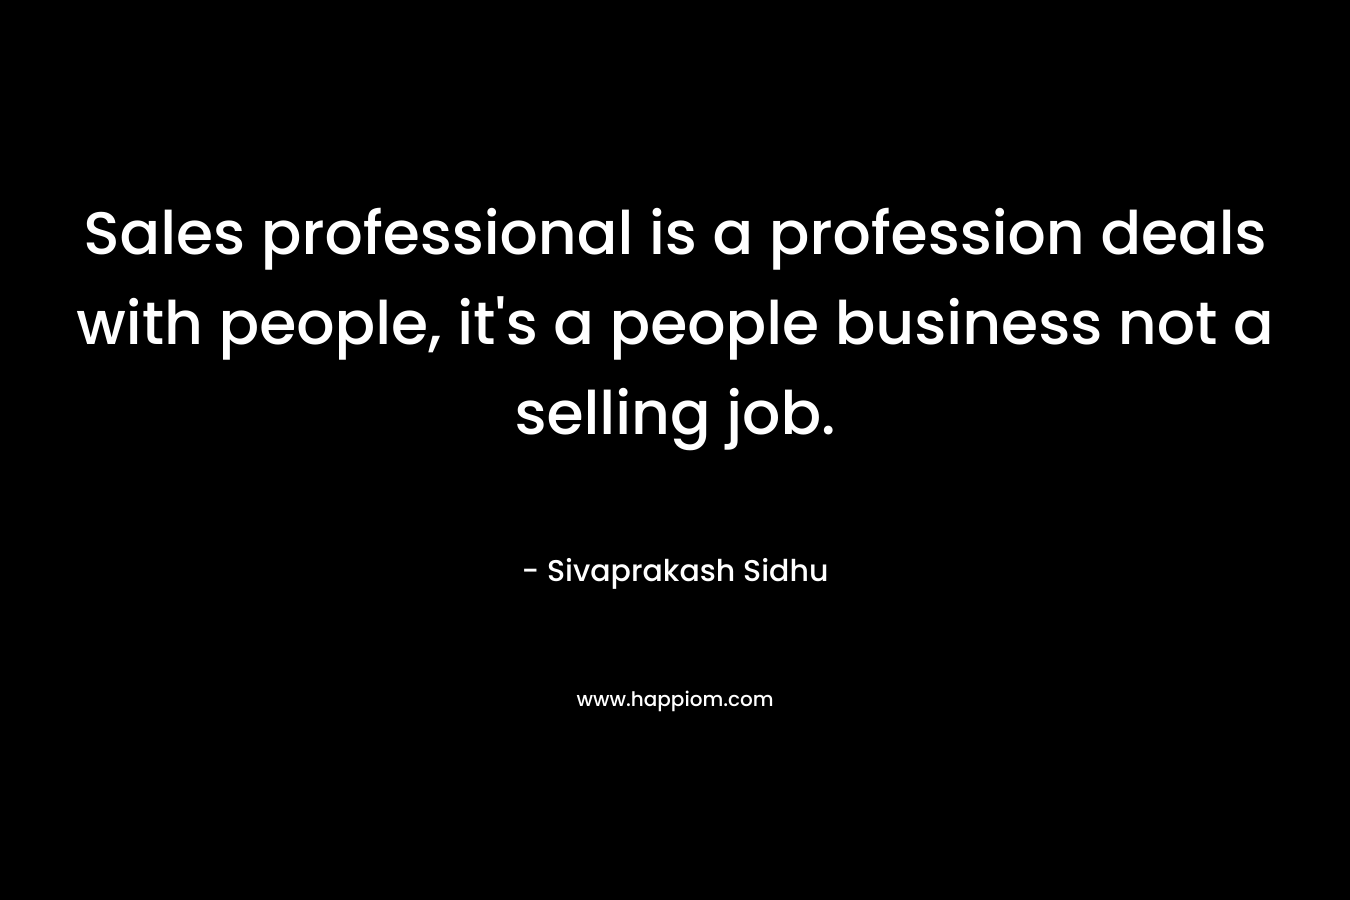 Sales professional is a profession deals with people, it’s a people business not a selling job. – Sivaprakash Sidhu